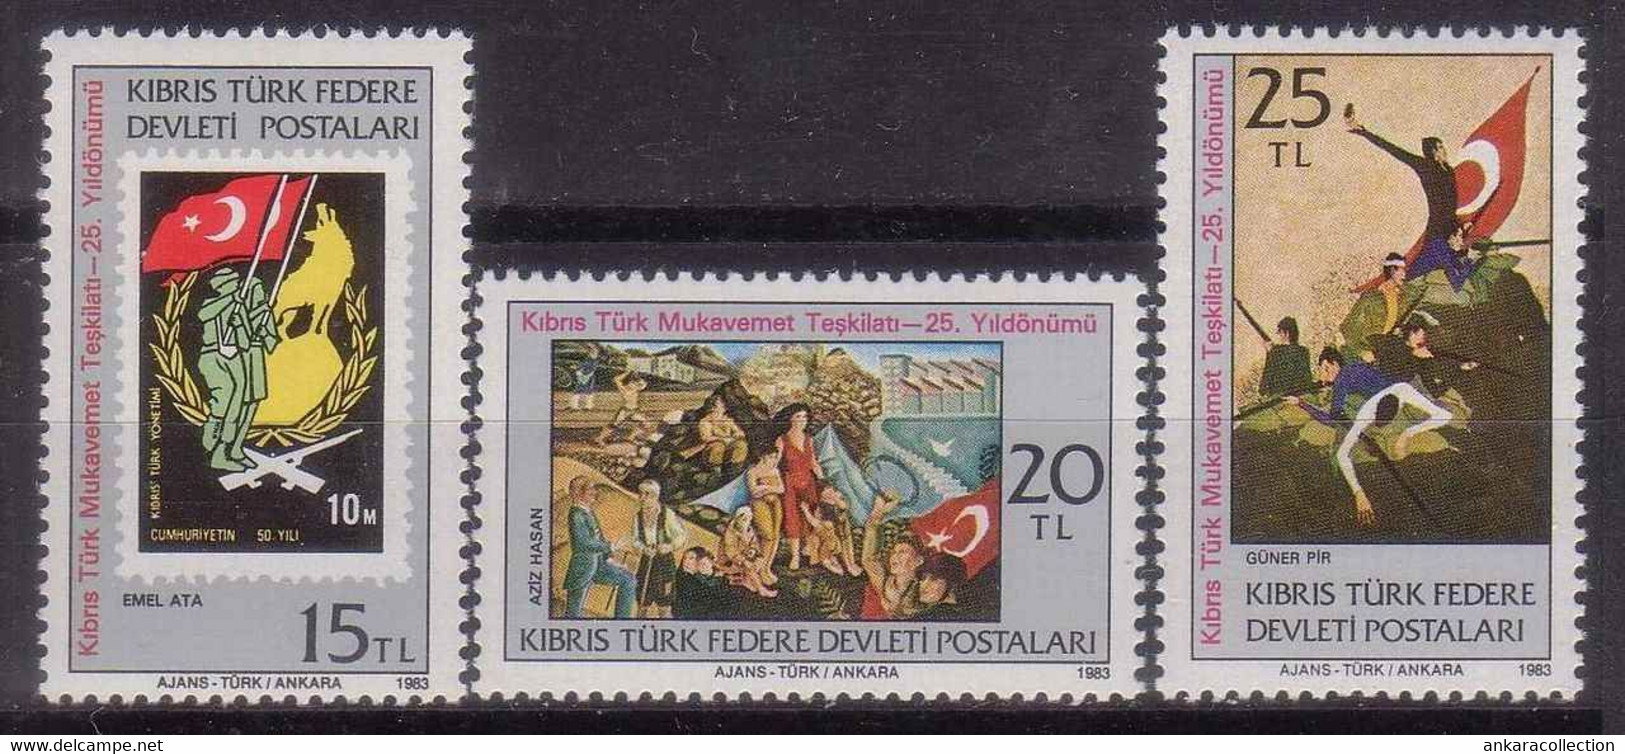 AC - NORTHERN CYPRUS STAMP -  ANNIVERSARIES AND EVENTS MNH 01 AUGUST 1983 - Neufs